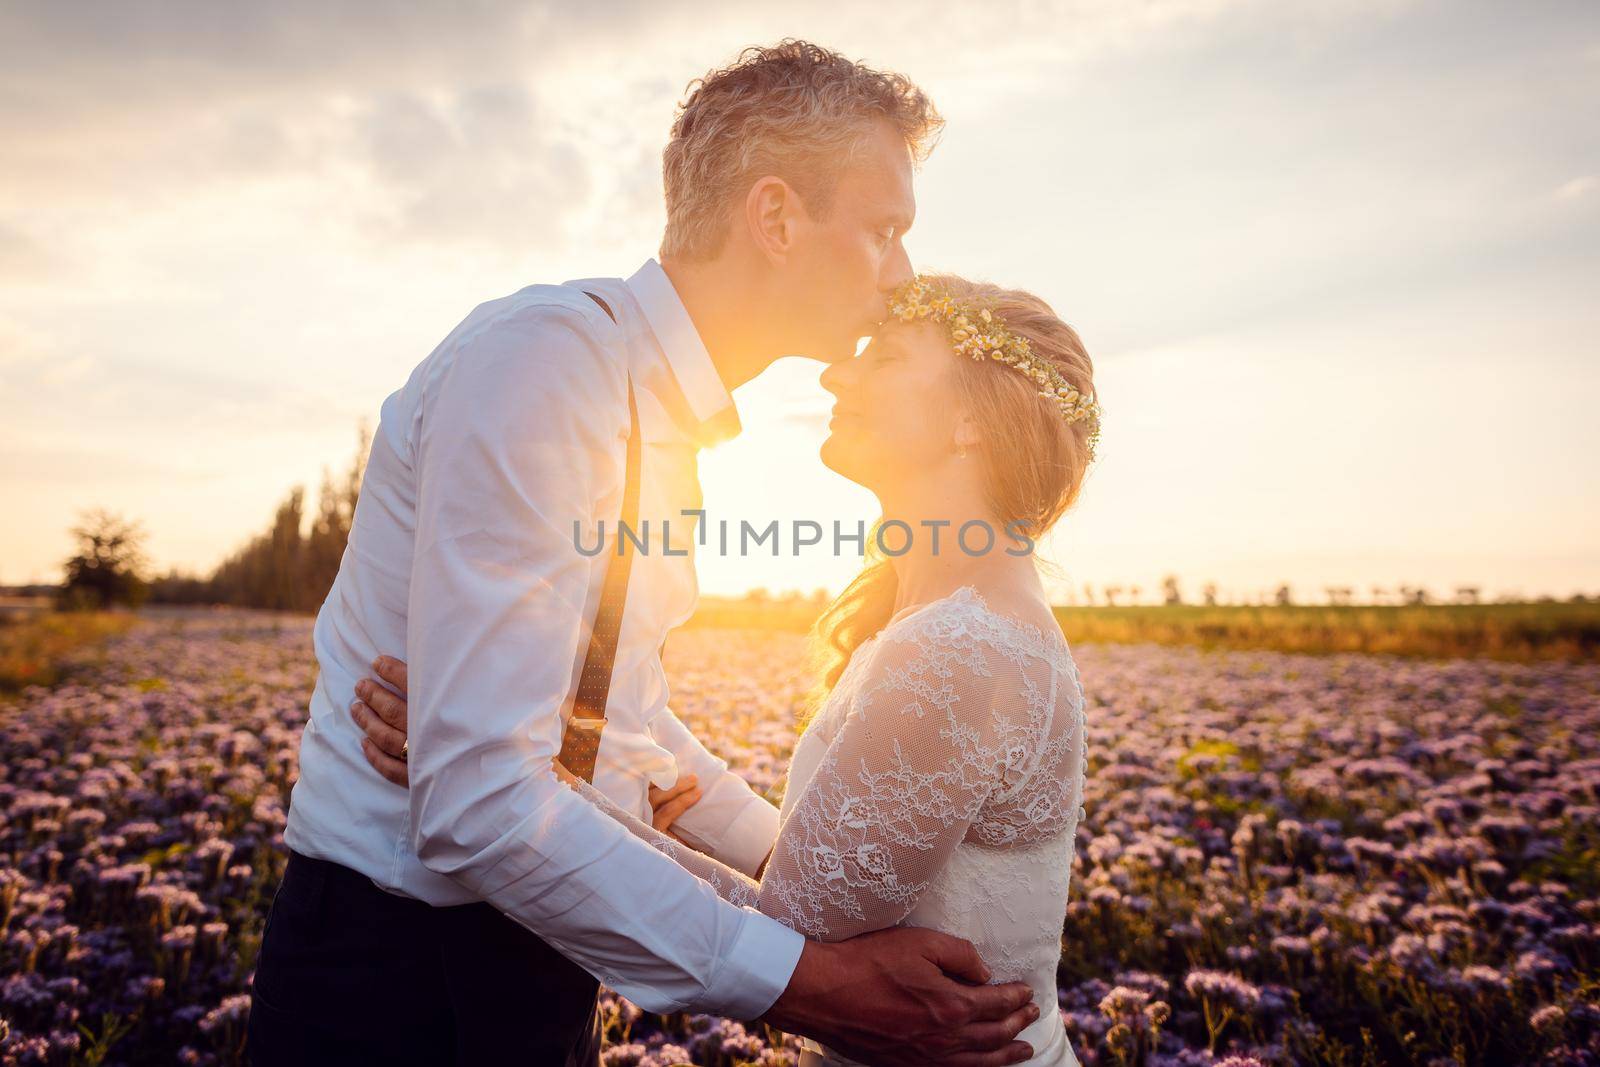 Bridegroom kissing his bride during romantic wedding in the village in a romantic setting